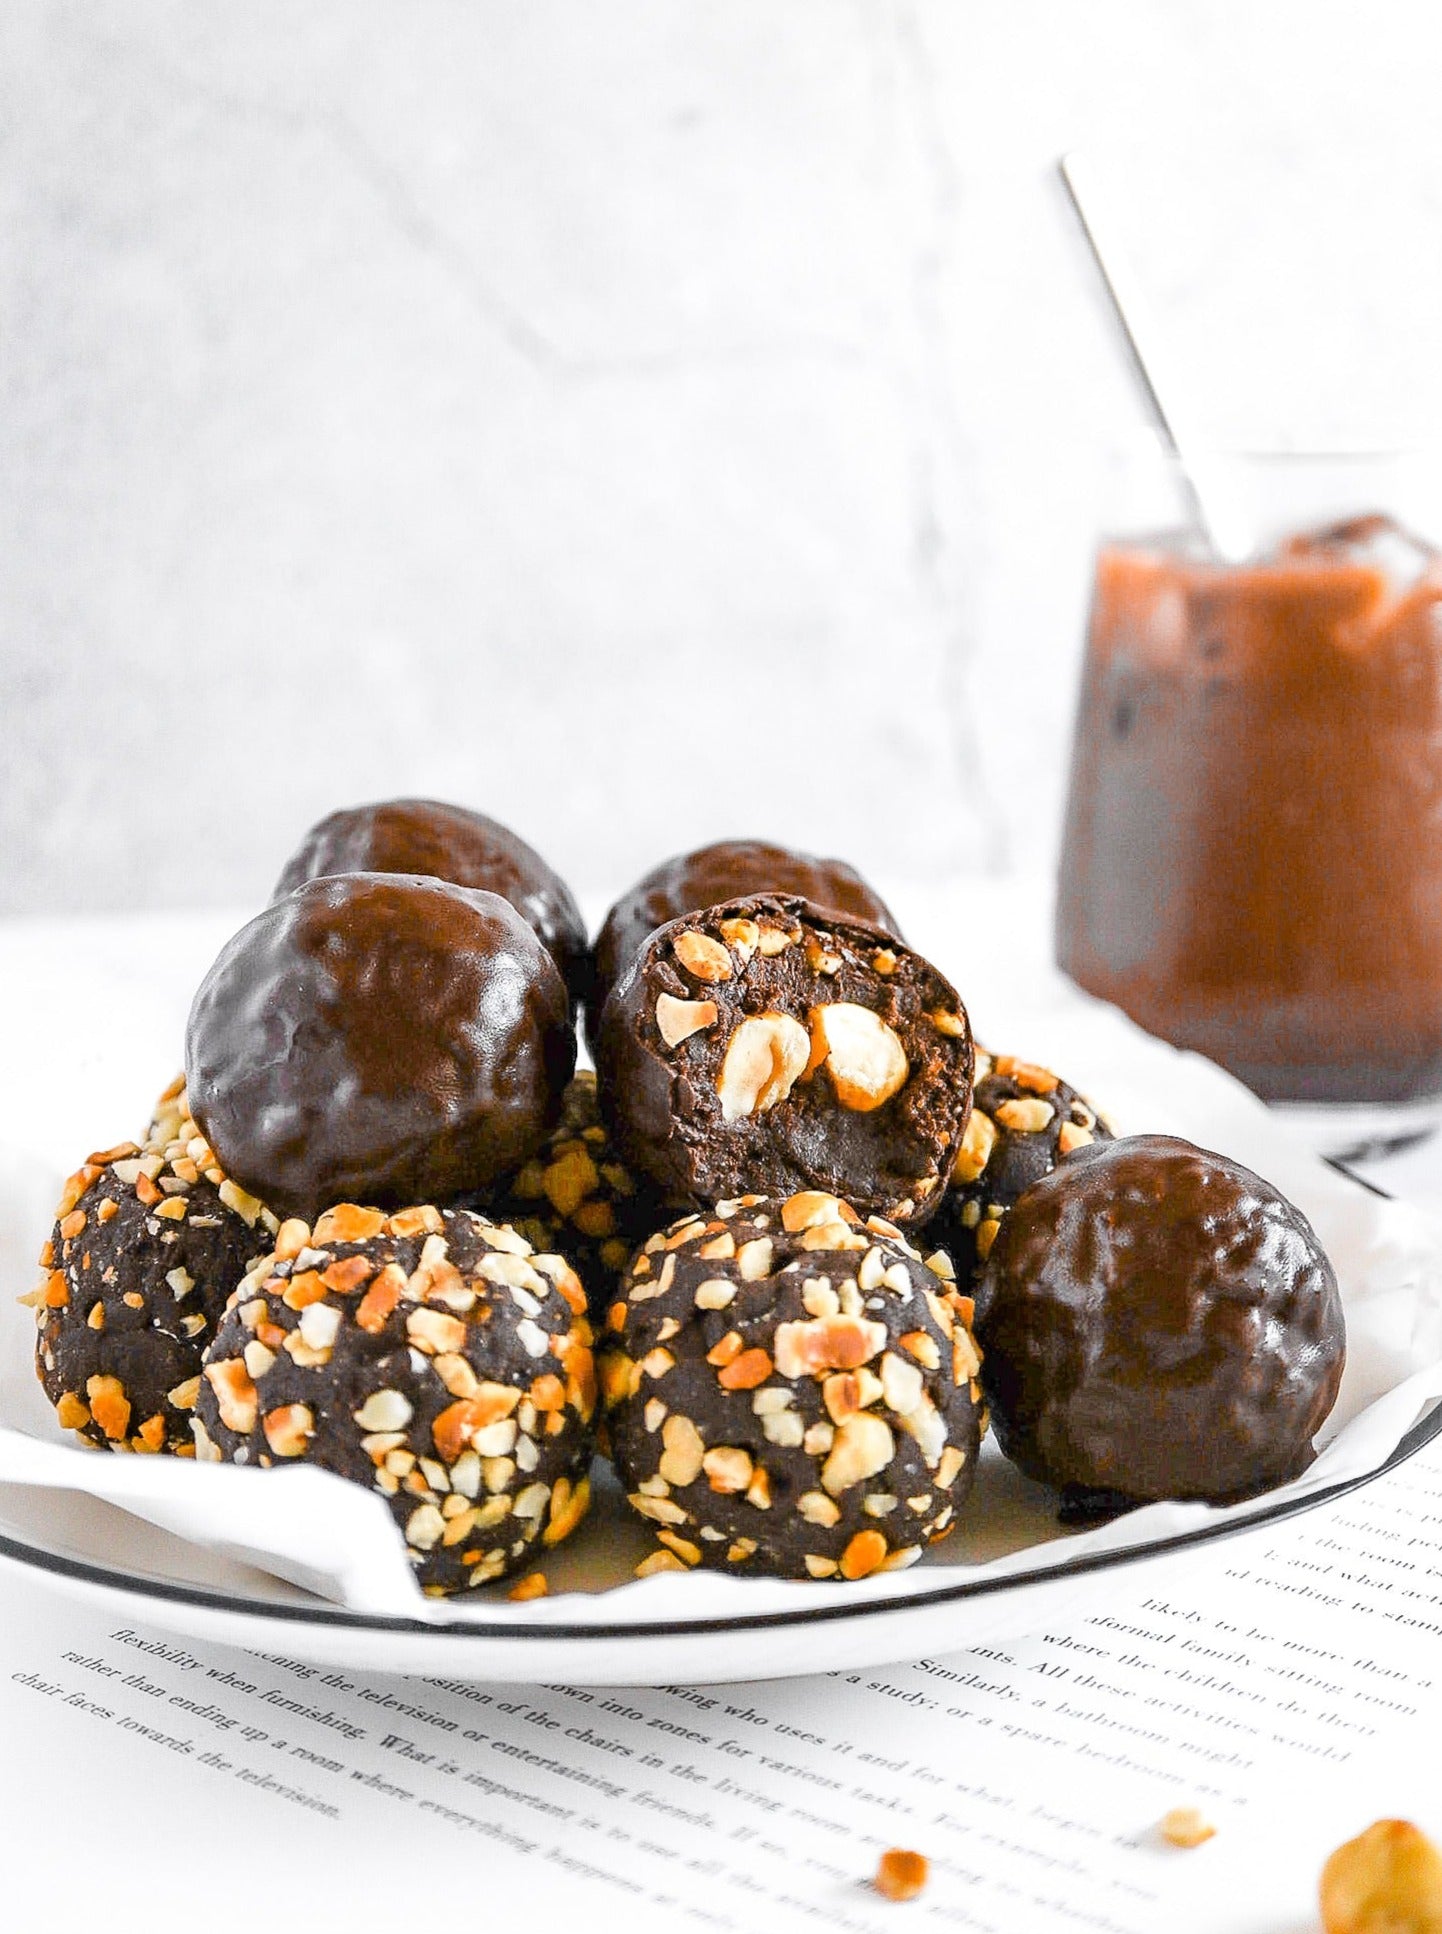 Nutella Bomb Pea Protein Balls (available in sugar-free chocolate coating)